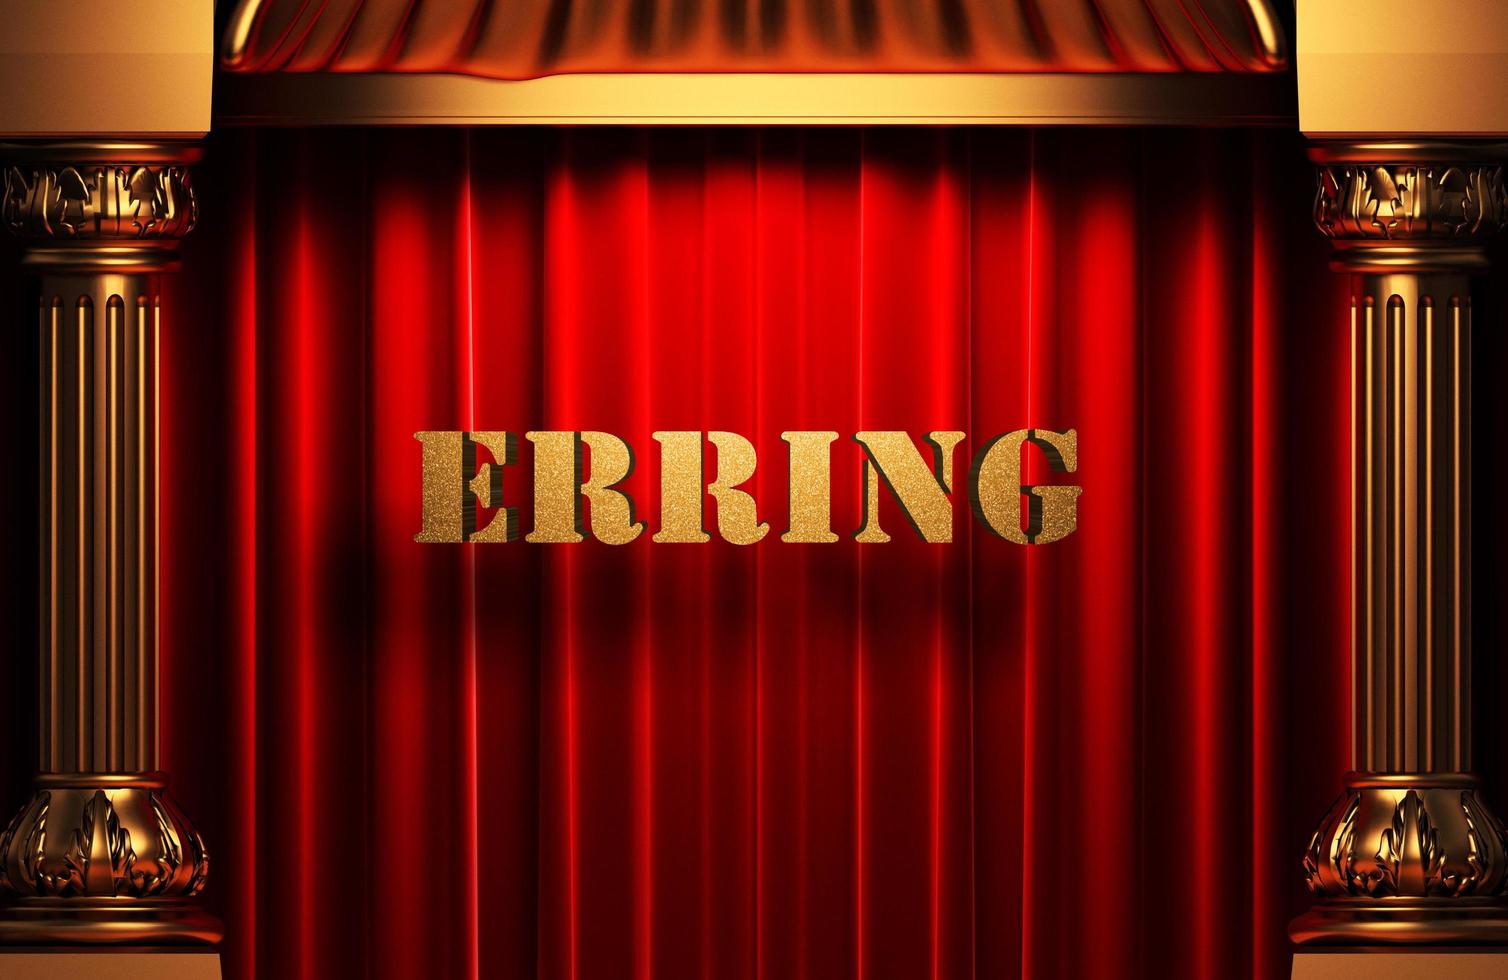 erring golden word on red curtain photo